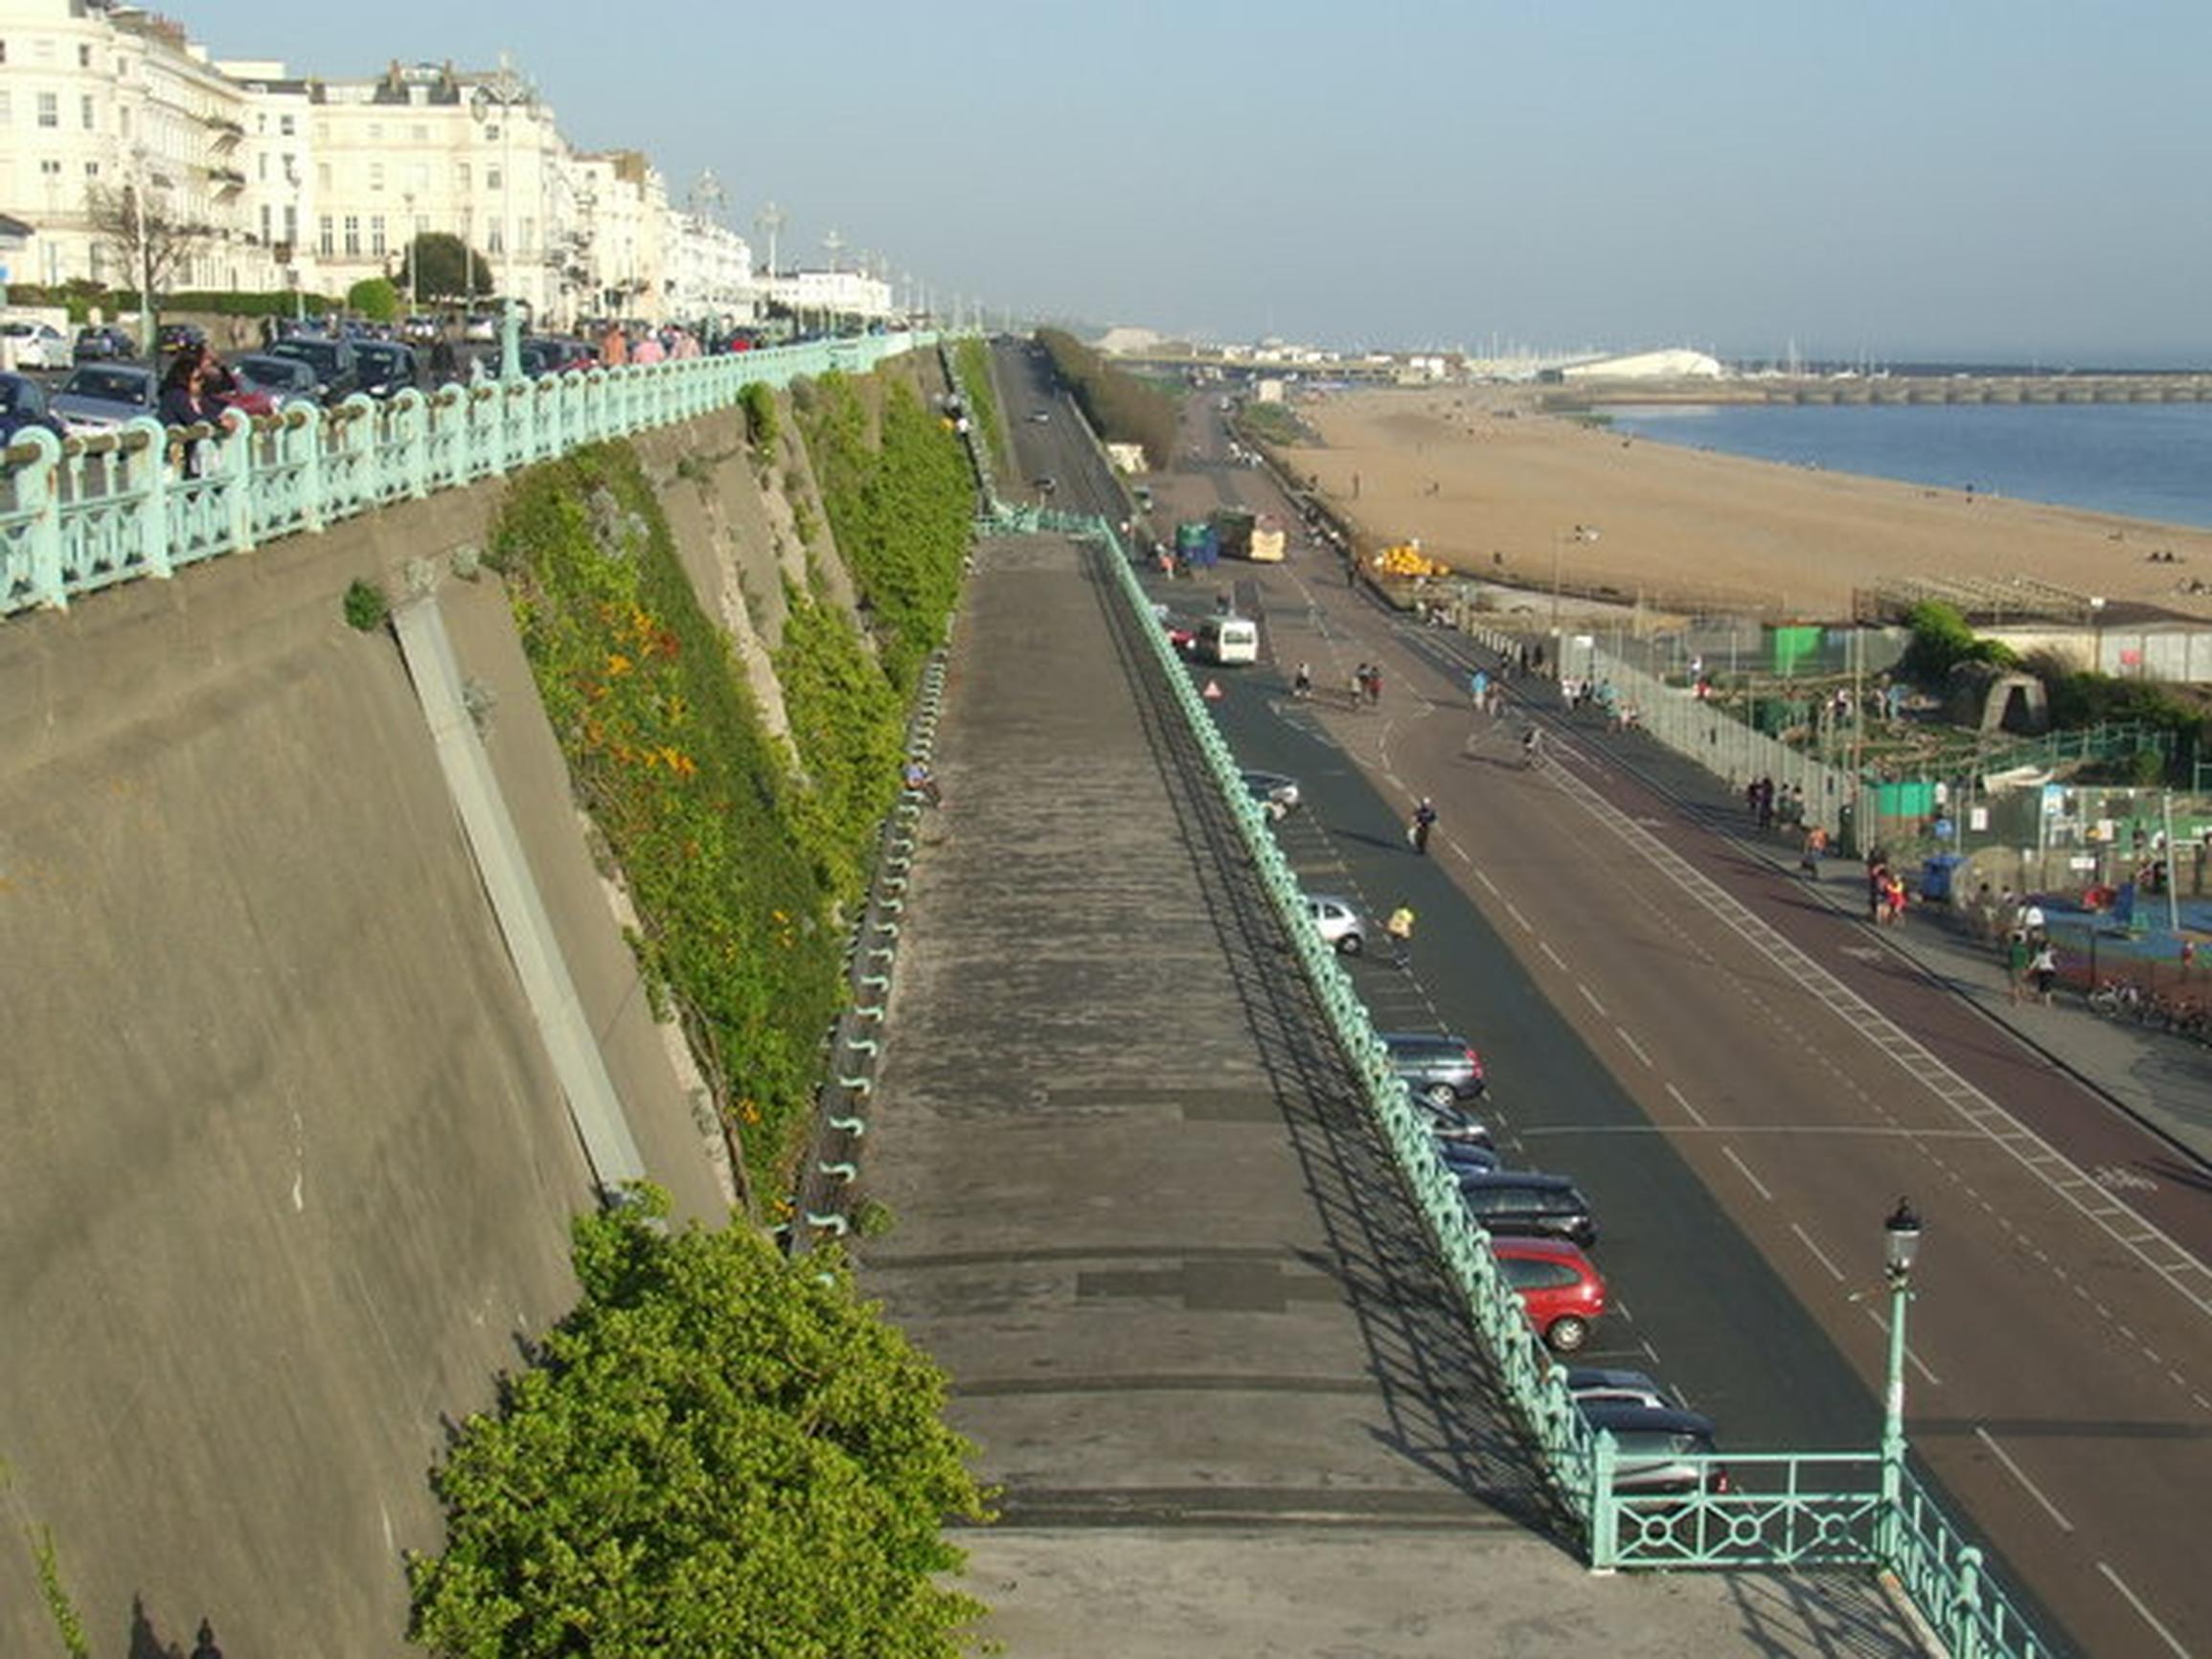 Left: The closure of Madeira Drive to vehicles was one of the first measures taken by any council to assist pedestrians and cyclists at the height of the lockdown. 
Right: Queueing traffic beside the Old Shoreham Road cycle lane